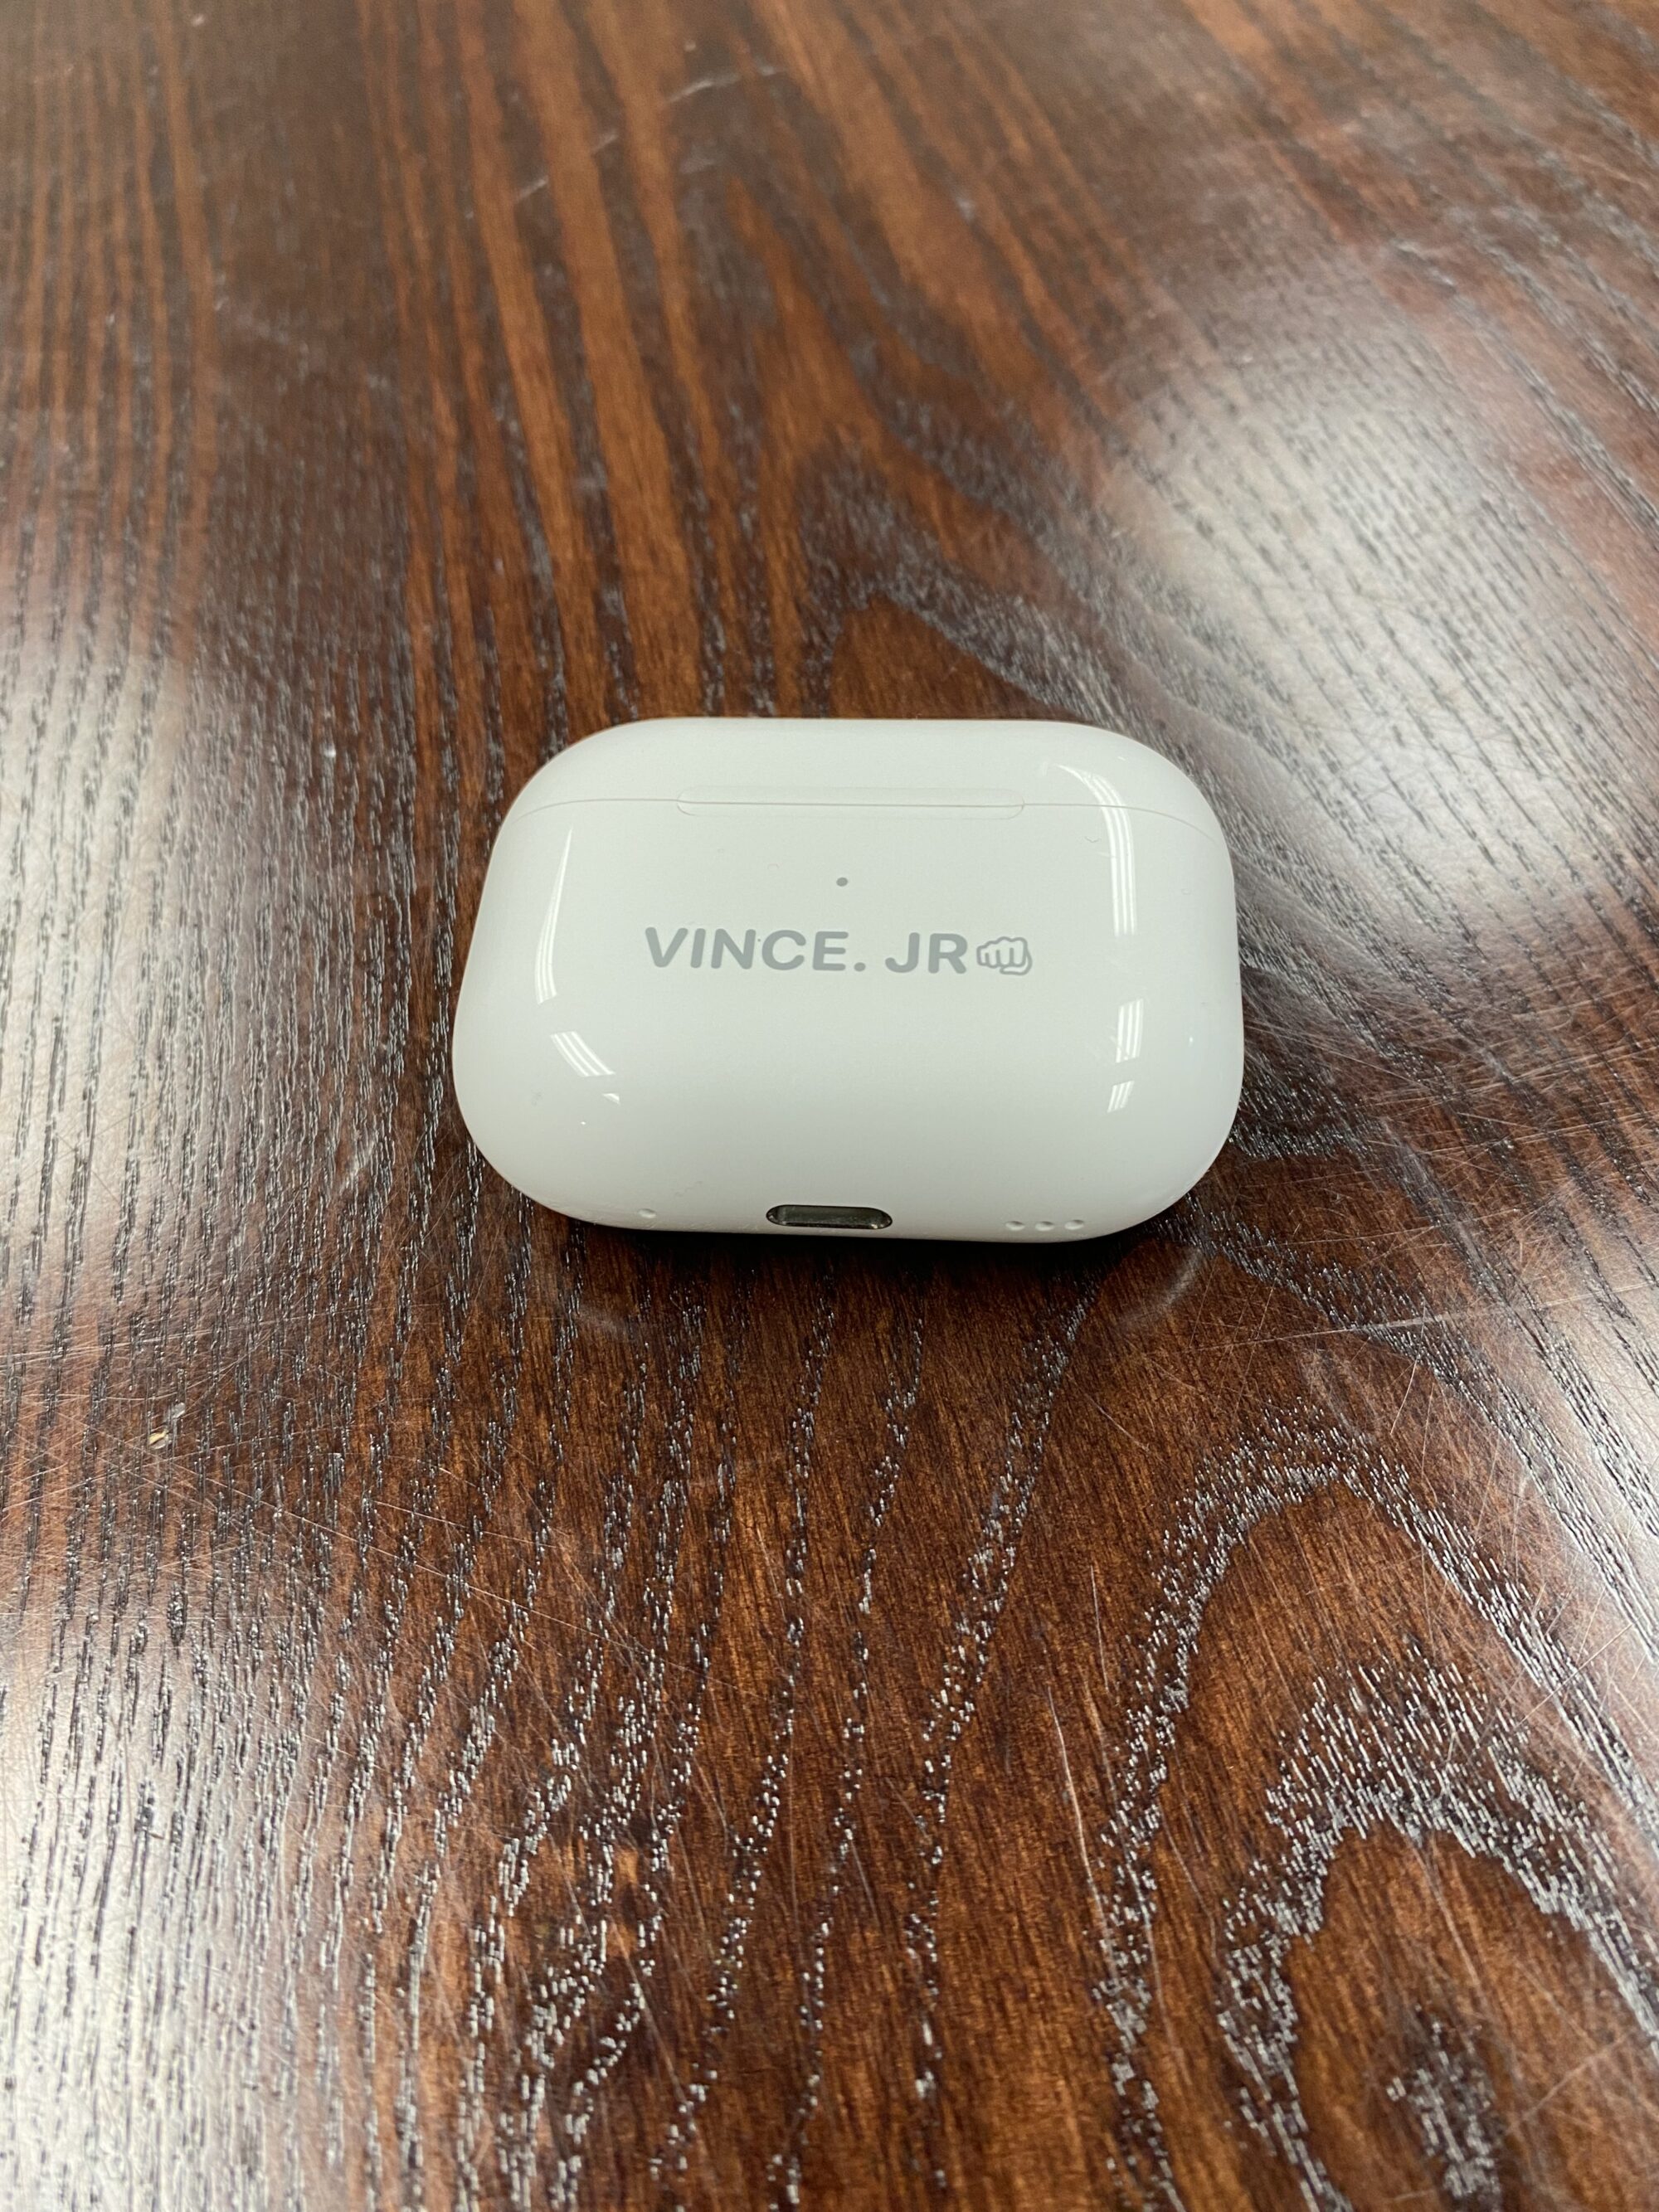 Photo of a white AirPods case on wooden tabletop surface.